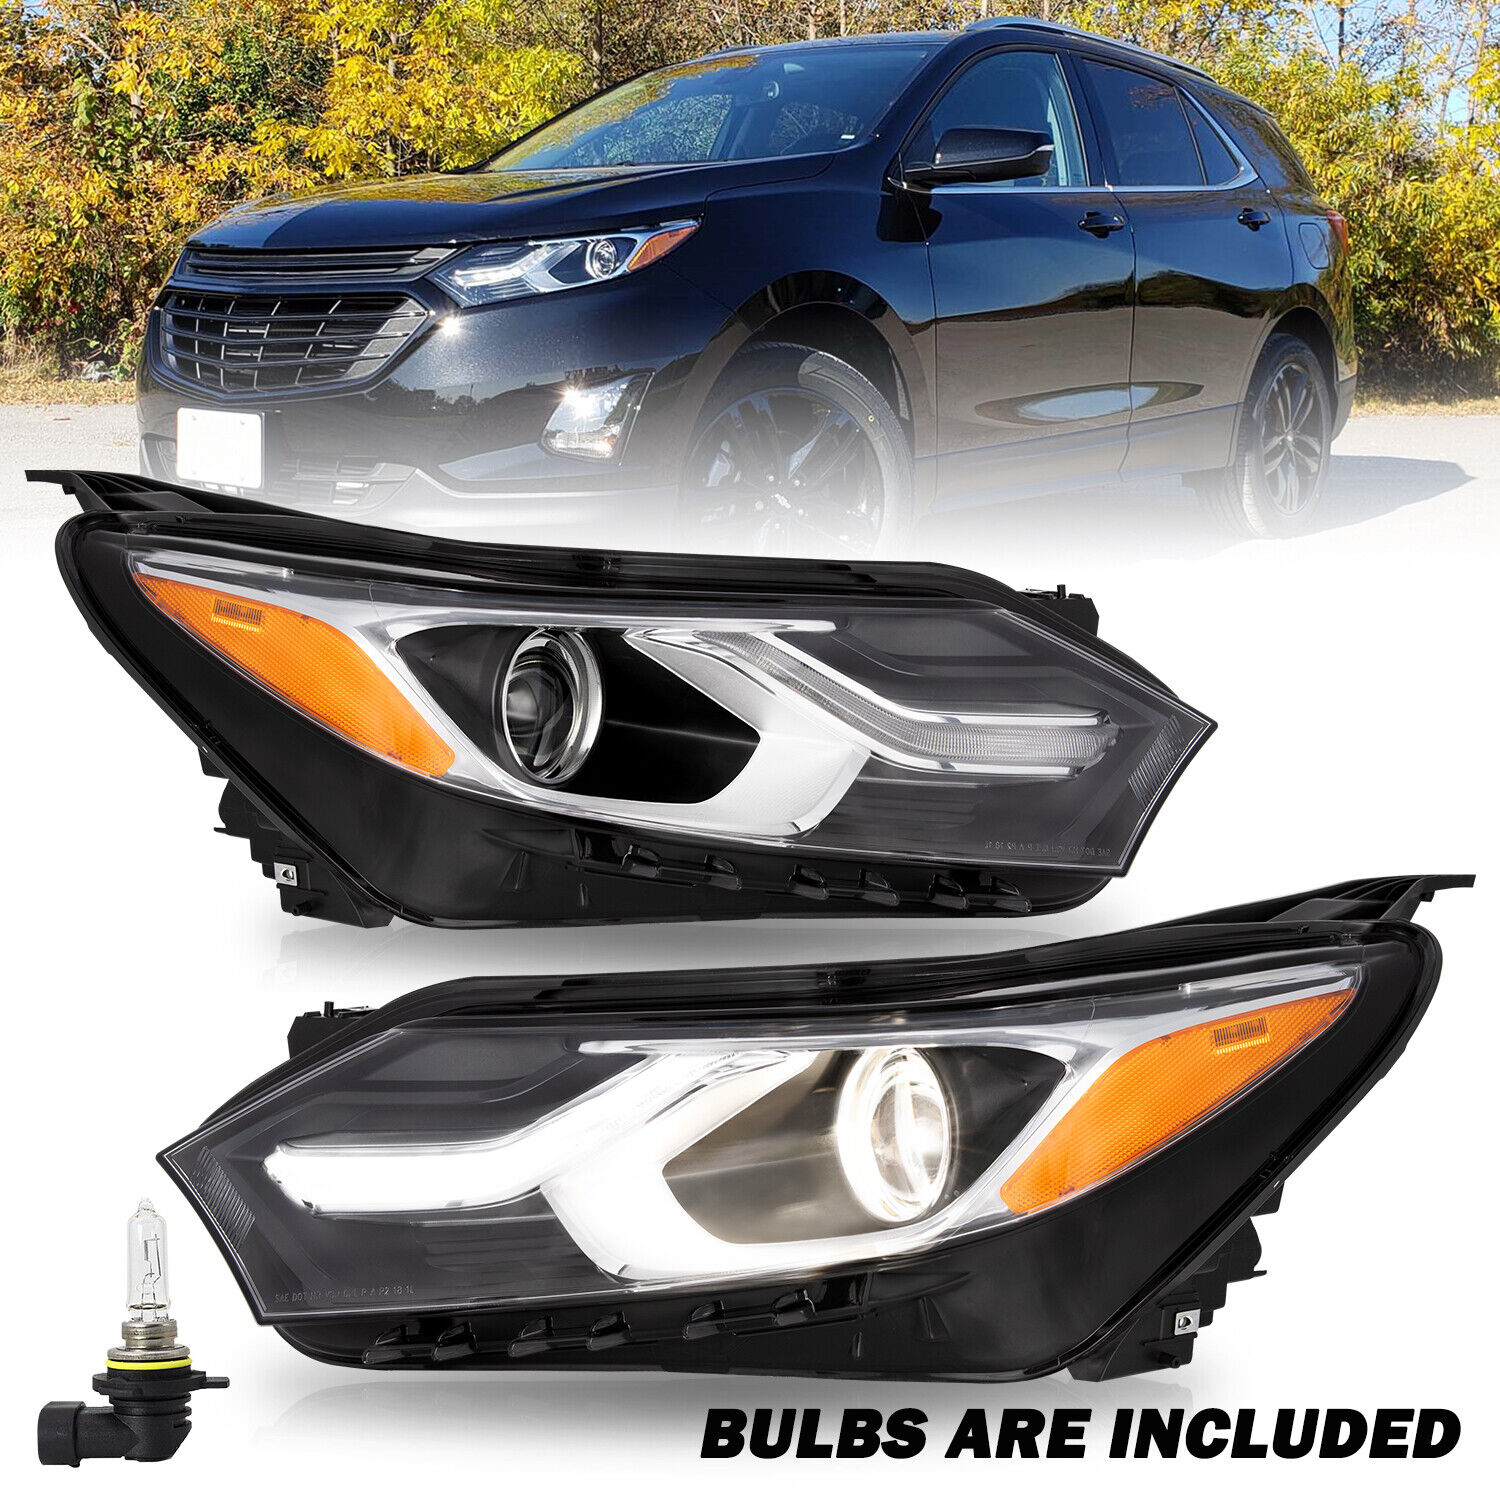 For Chevy Equinox 2018-2020 Halogen Projector Headlights Headlamps w/ LED DRL